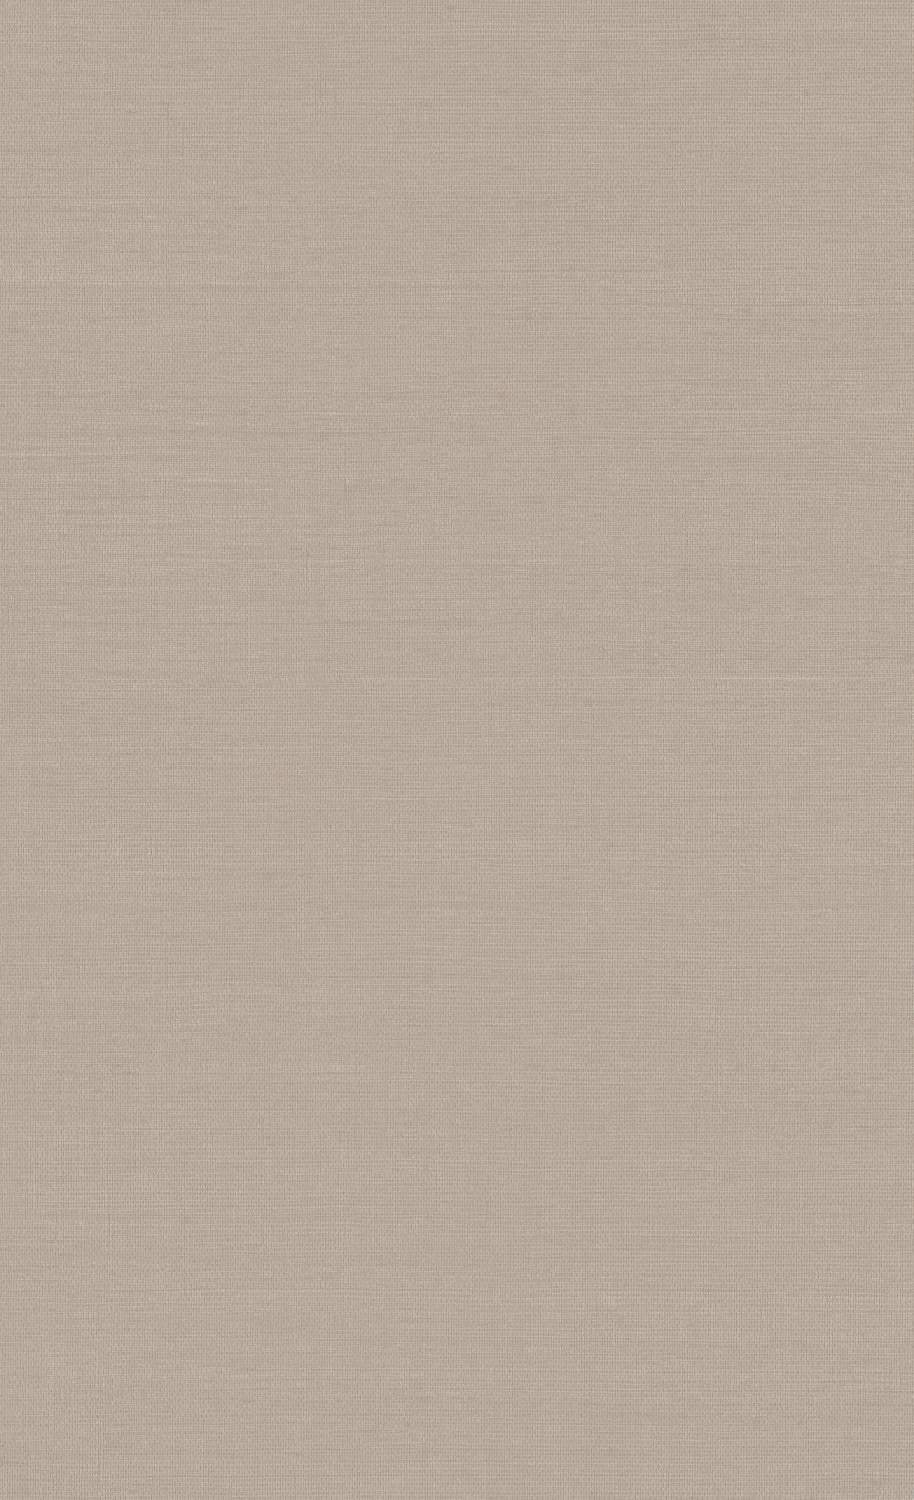 Brown and Beige Wallpapers - Top Free Brown and Beige Backgrounds